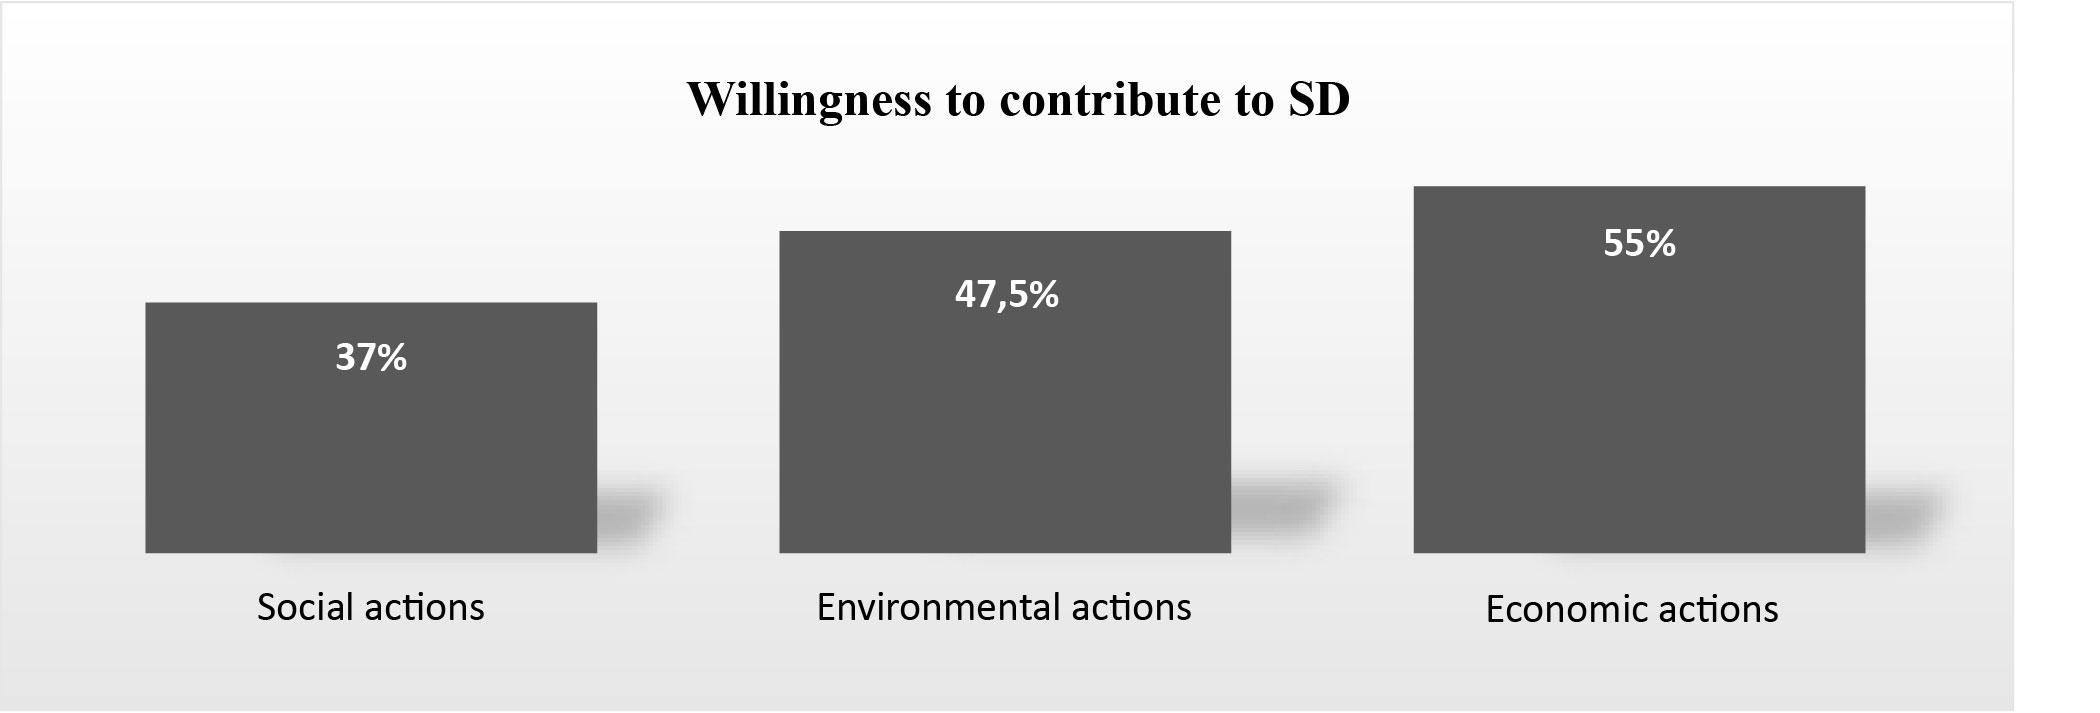 Figure 5. Students’ stated willingness to contribute to SD, categorized into the three SD dimensions: social actions, environmental actions and economic actions.